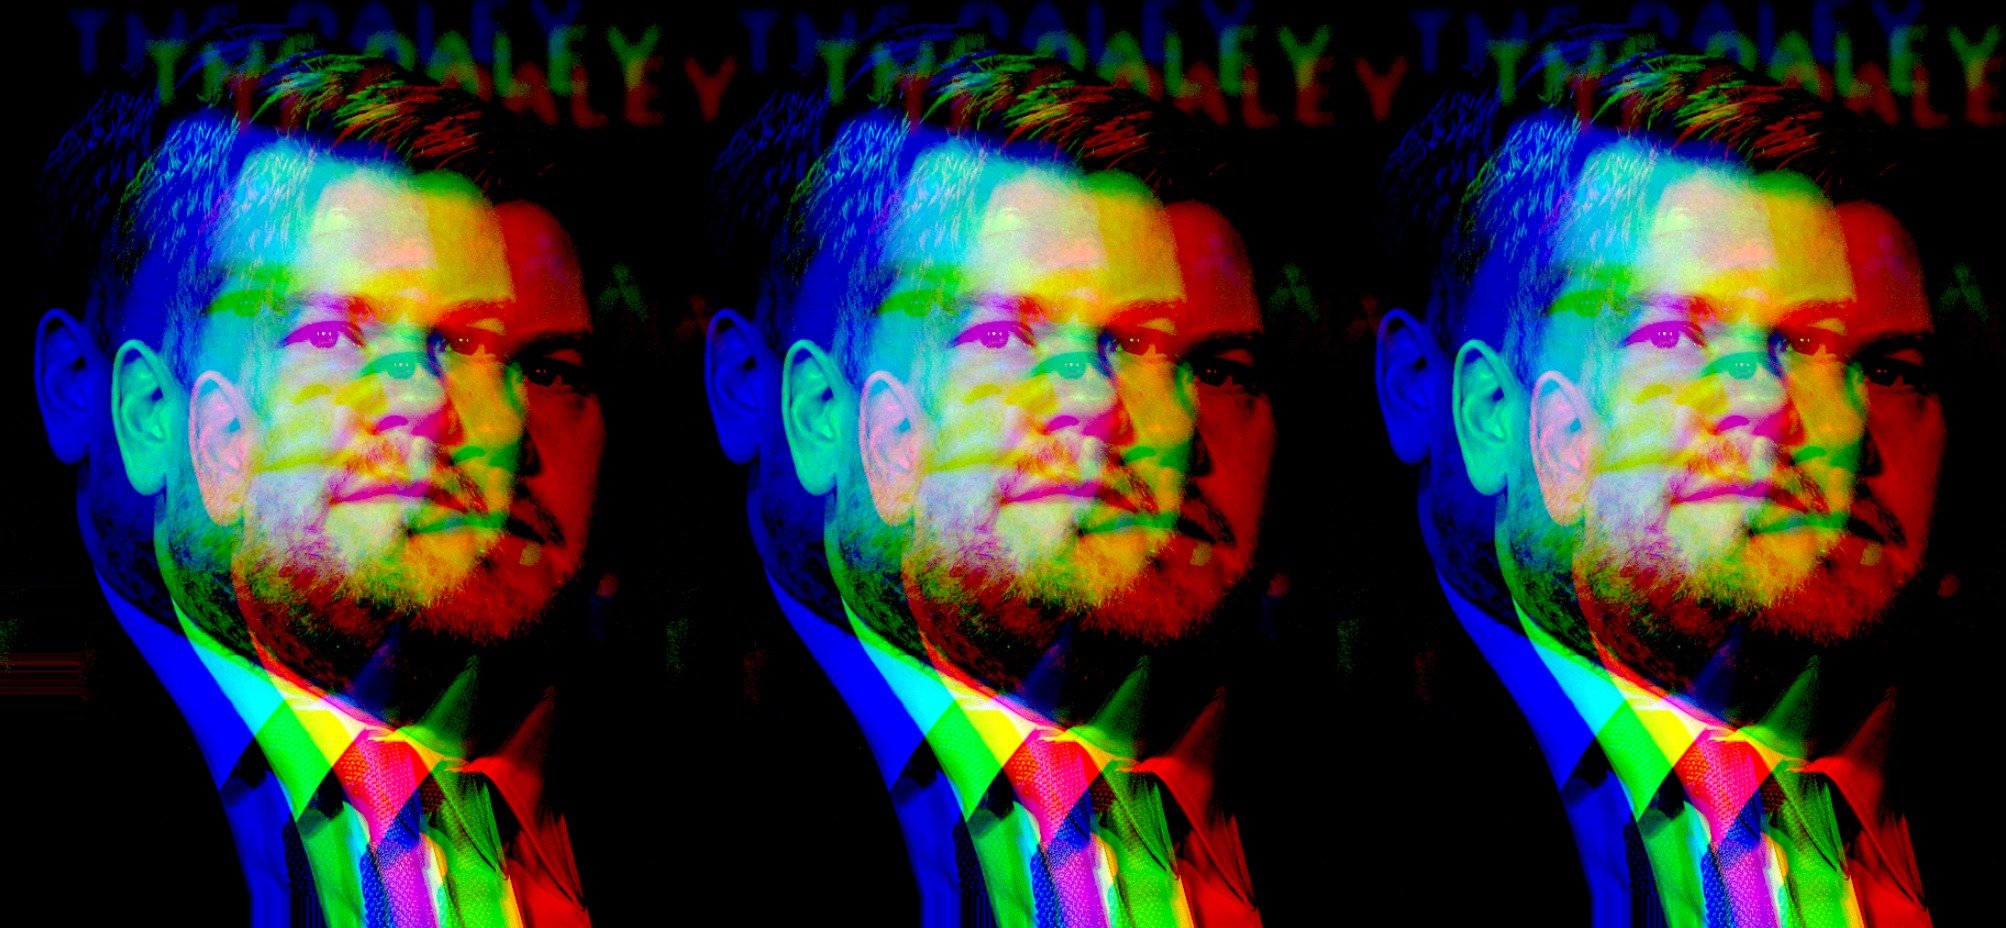 Digitally glitched photos of James Corden